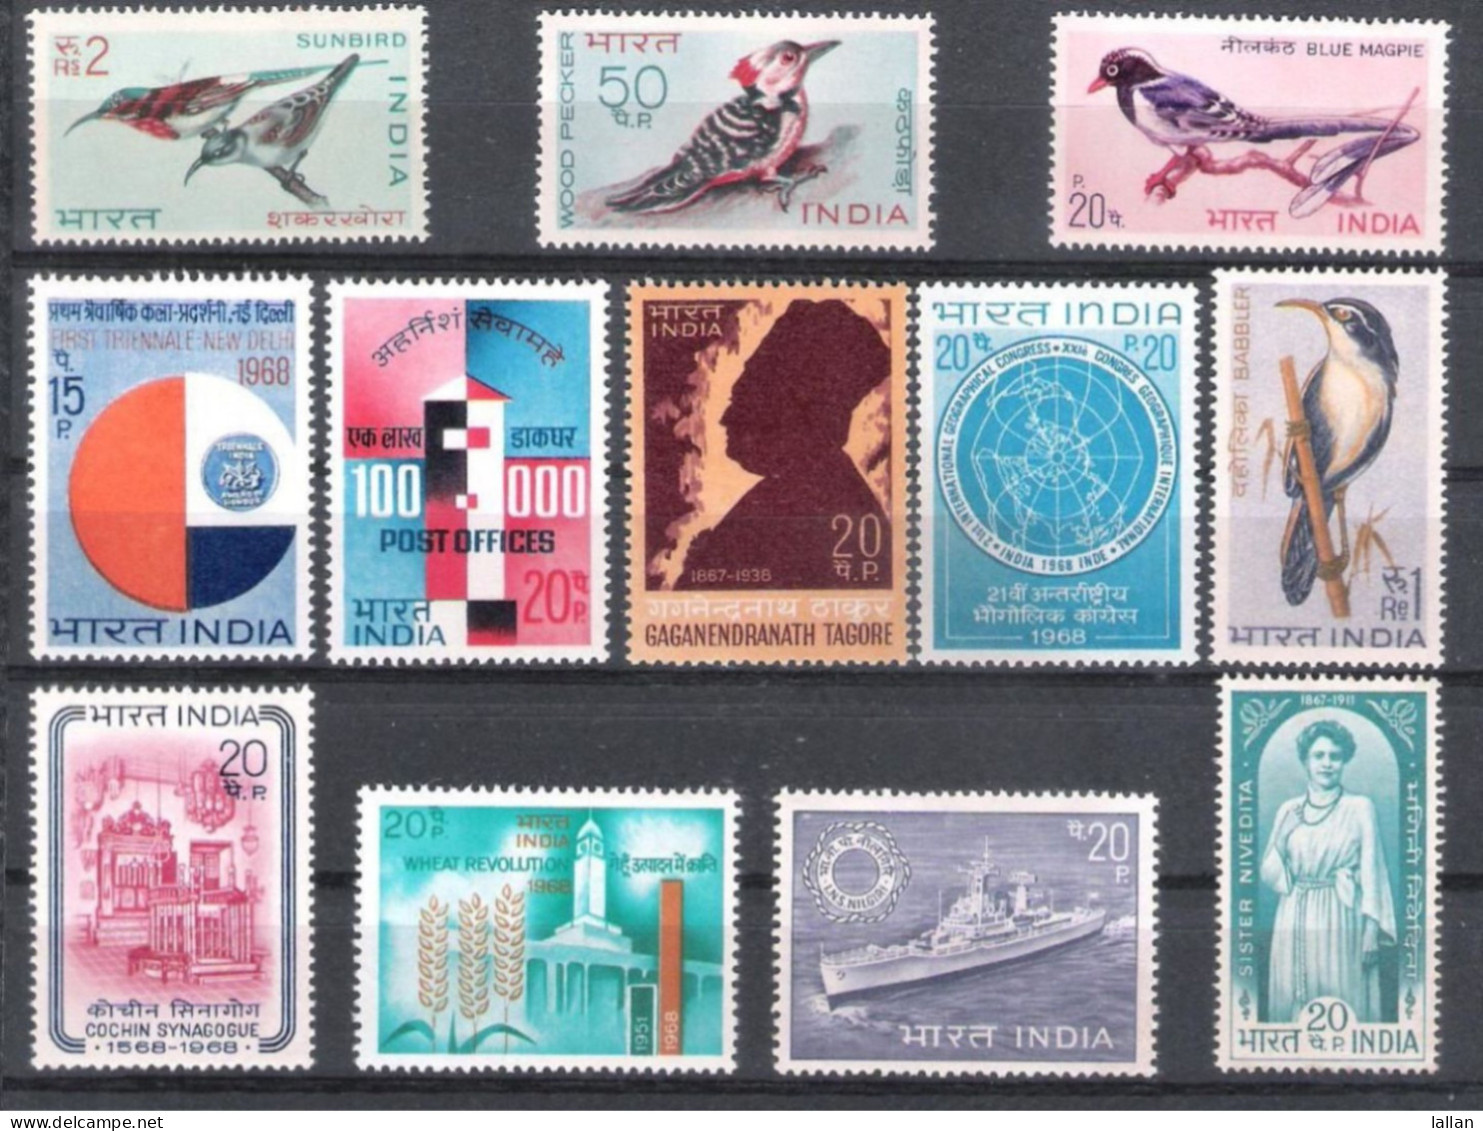 12-MNH,1968, First Bird Set, Navy, Jalianawala Bagh, Geographical Cobgress,CV-$15.00, Condition As Per ScanSGALM2 - Nuevos